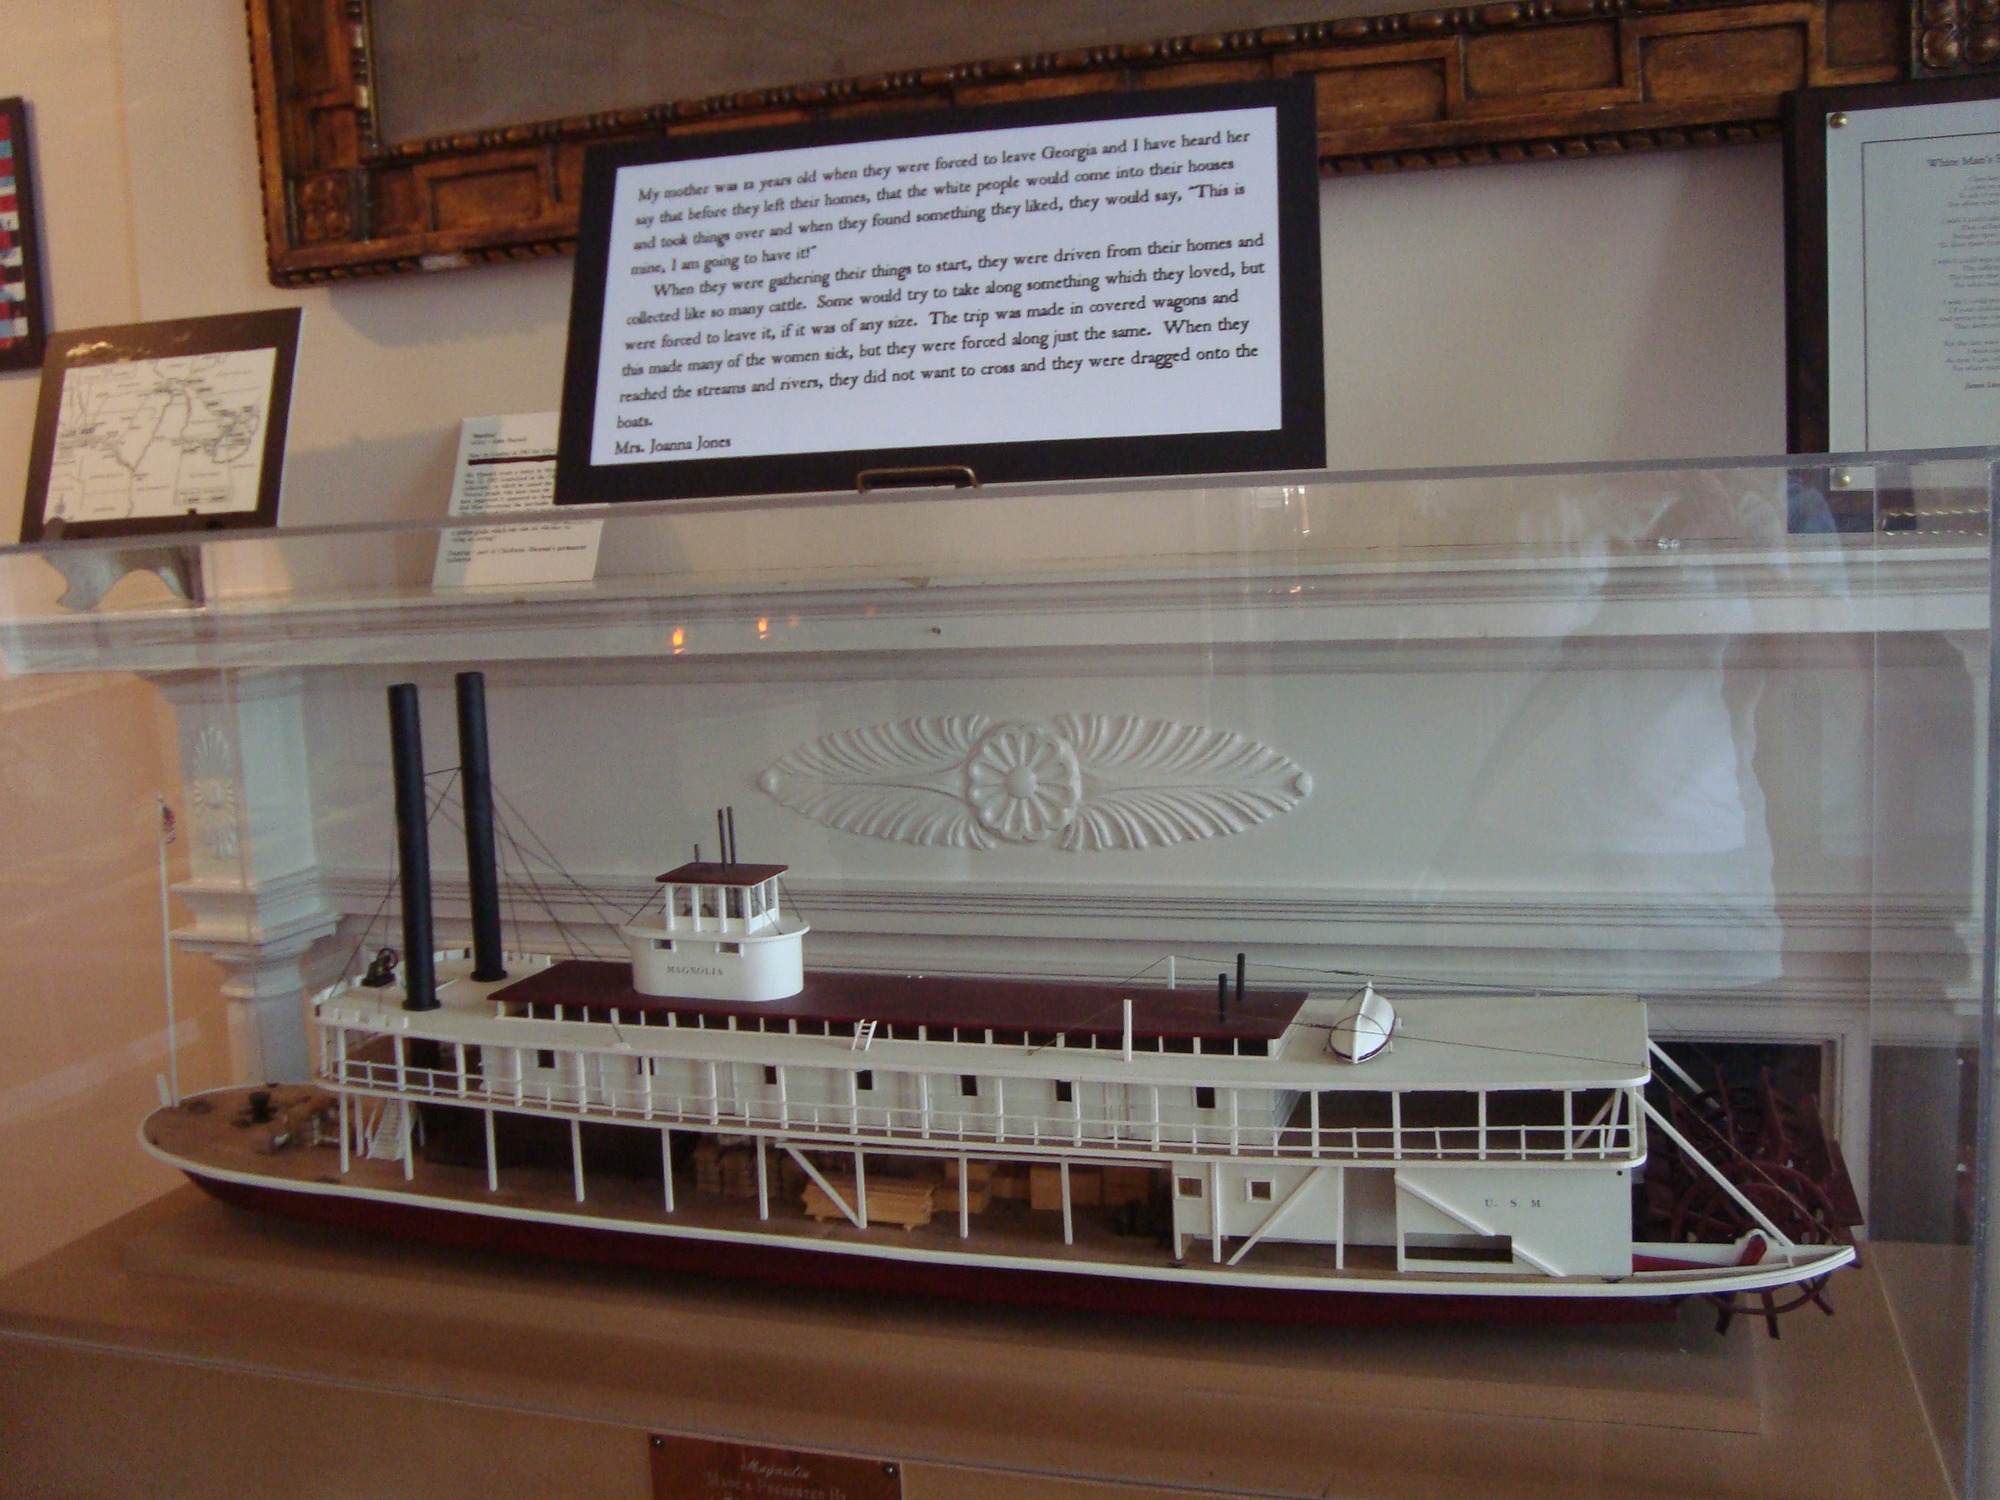 A miniature riverboat model at the Chieftains Museum, Major Ridge Home in Rome, Georgia